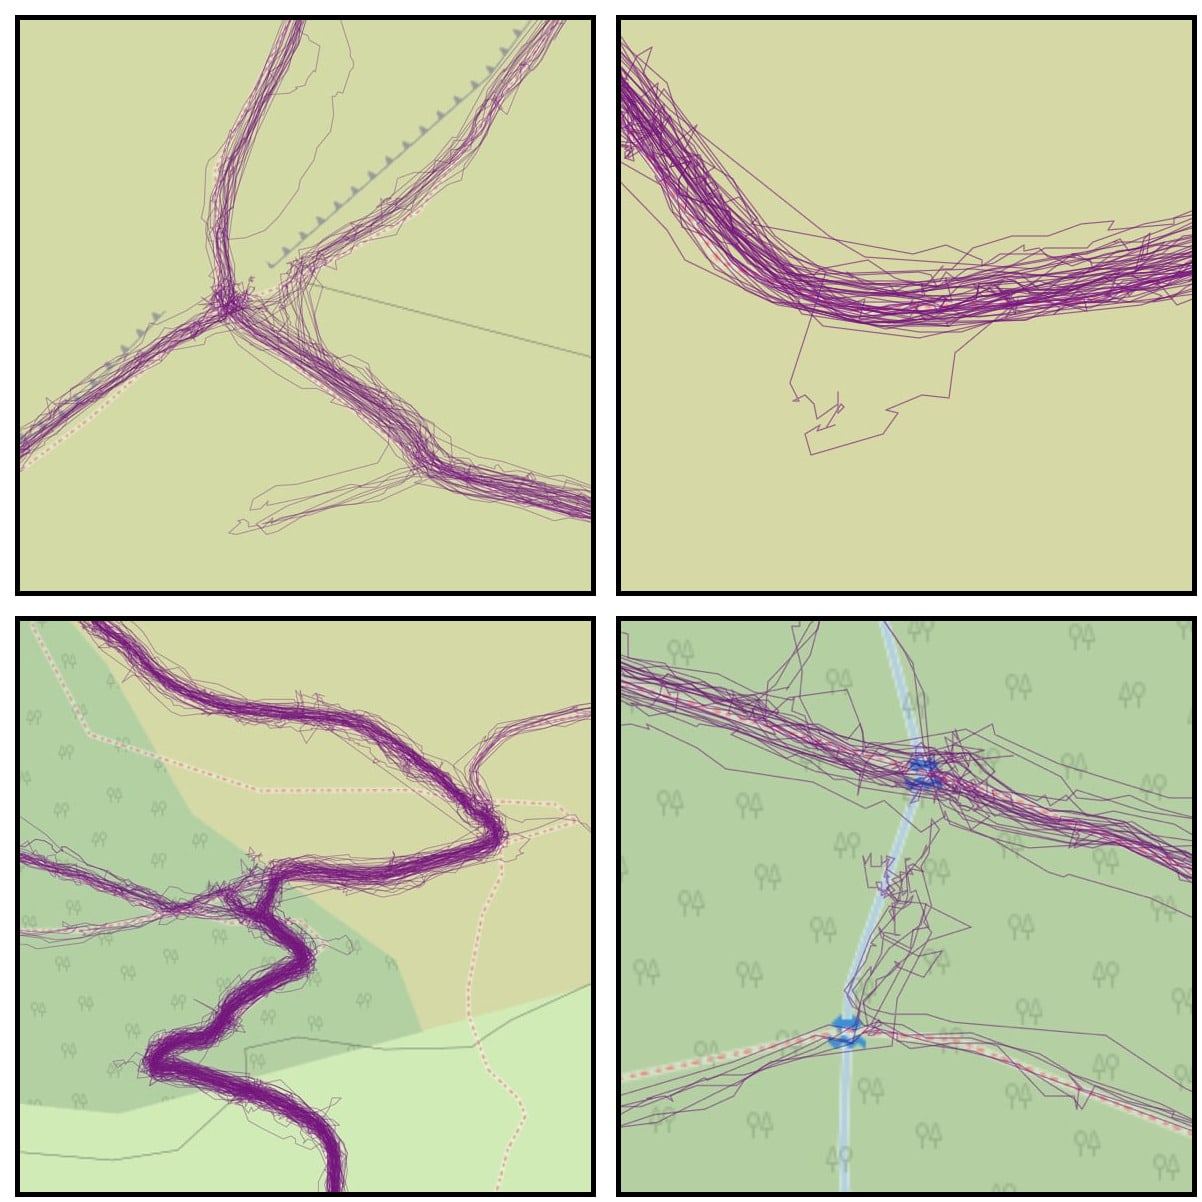 grid of 4 screenshot of maps showing multiple trails